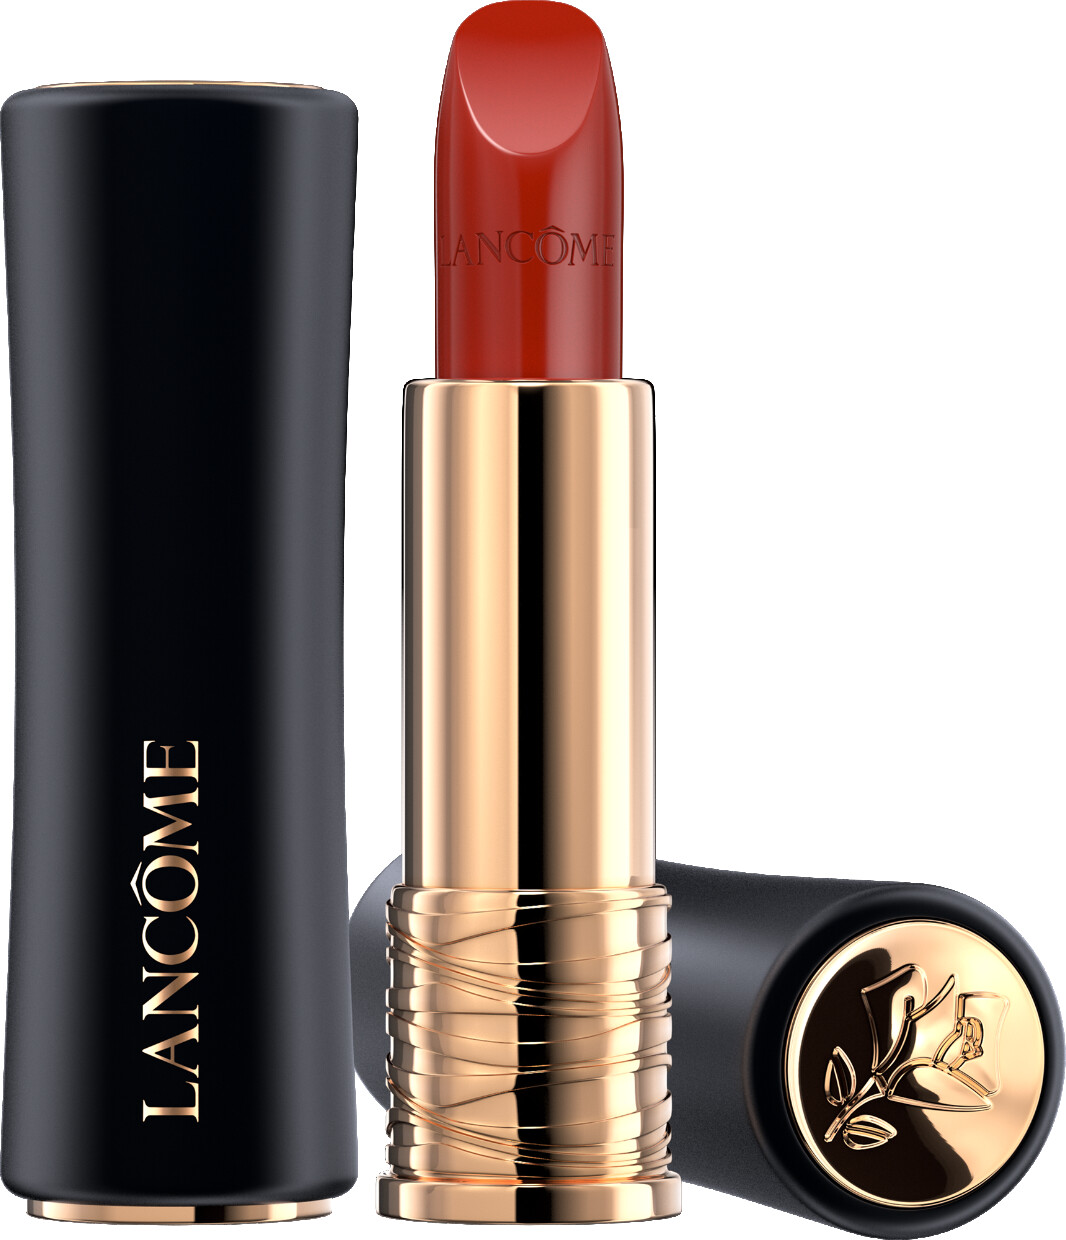 Lancome L'Absolu Rouge Cream Lipstick 3.4g 196 - French Touch